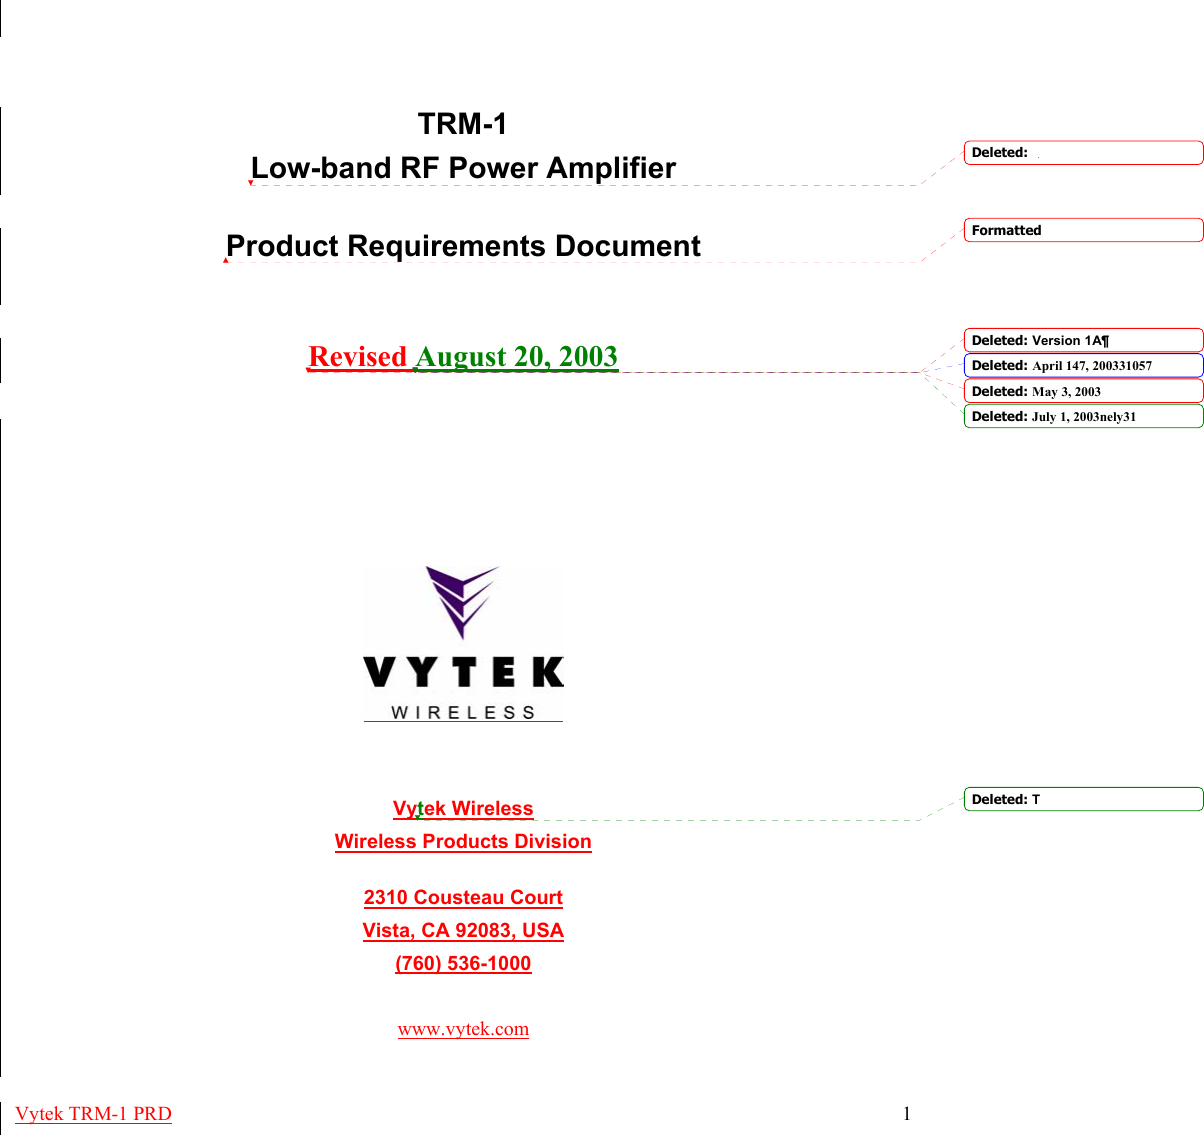 Vytek TRM-1 PRD 1      TRM-1 Low-band RF Power Amplifier  Product Requirements Document   Revised August 20, 2003         Vytek Wireless Wireless Products Division  2310 Cousteau Court Vista, CA 92083, USA (760) 536-1000  www.vytek.com FormattedDeleted: Deleted: Version 1A¶Deleted: April 147, 200331057Deleted: May 3, 2003Deleted: July 1, 2003nely31Deleted: T